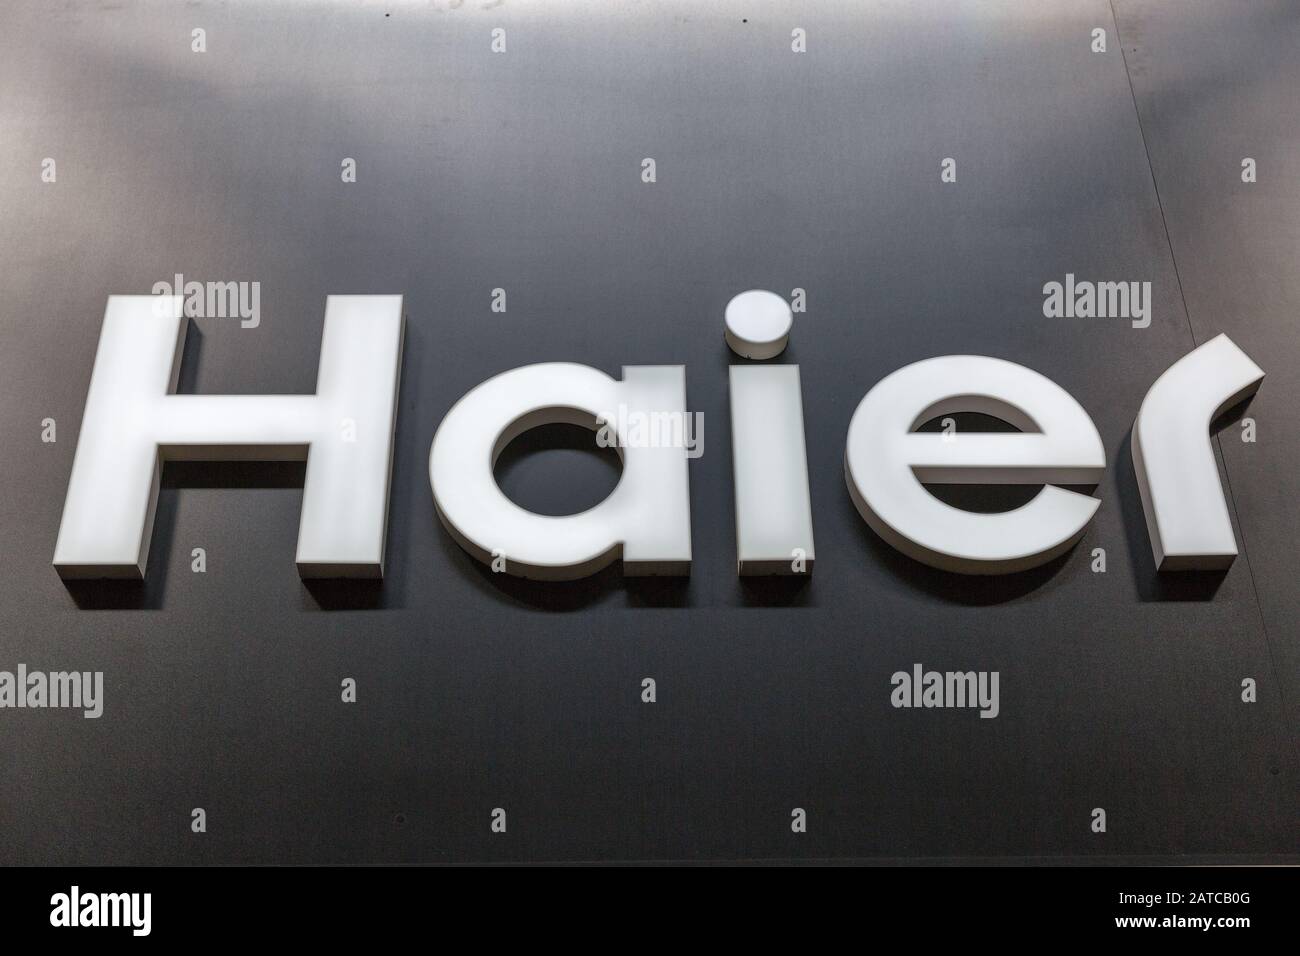 KYIV, UKRAINE - APRIL 06, 2019: Haier logo closeup on booth at CEE 2019, the largest electronics trade show of Ukraine. Haier is a multinational home Stock Photo